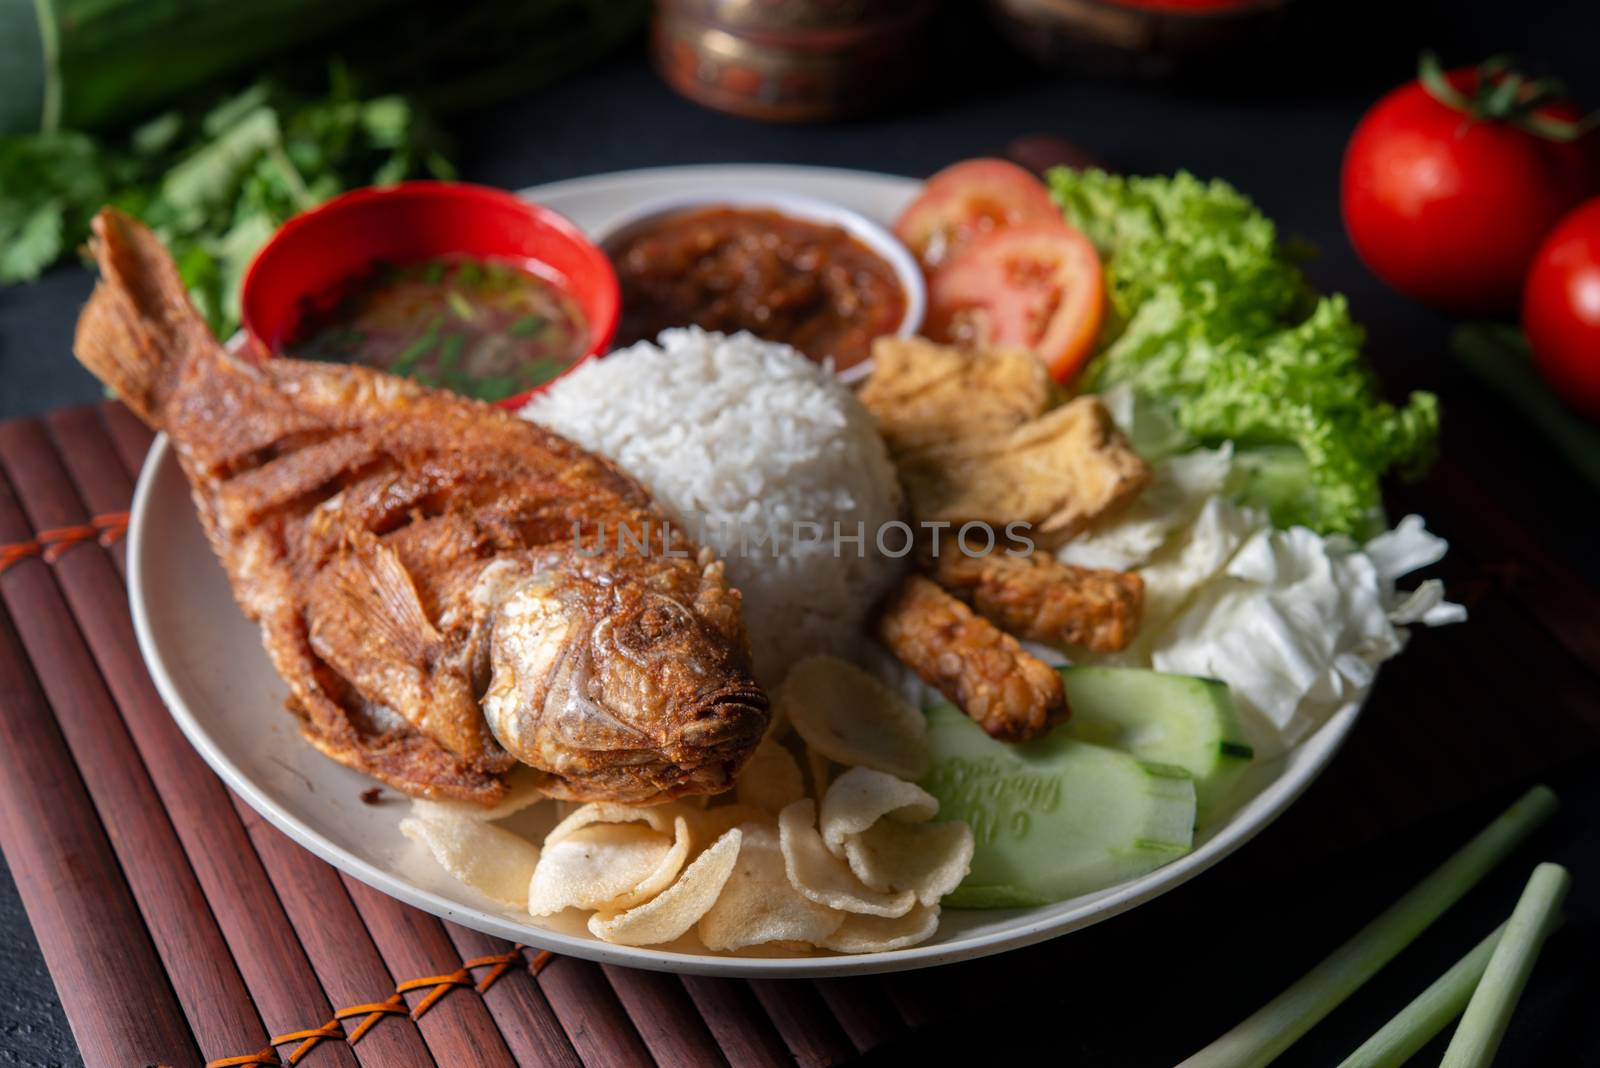 Fried tilapia fish and rice by szefei